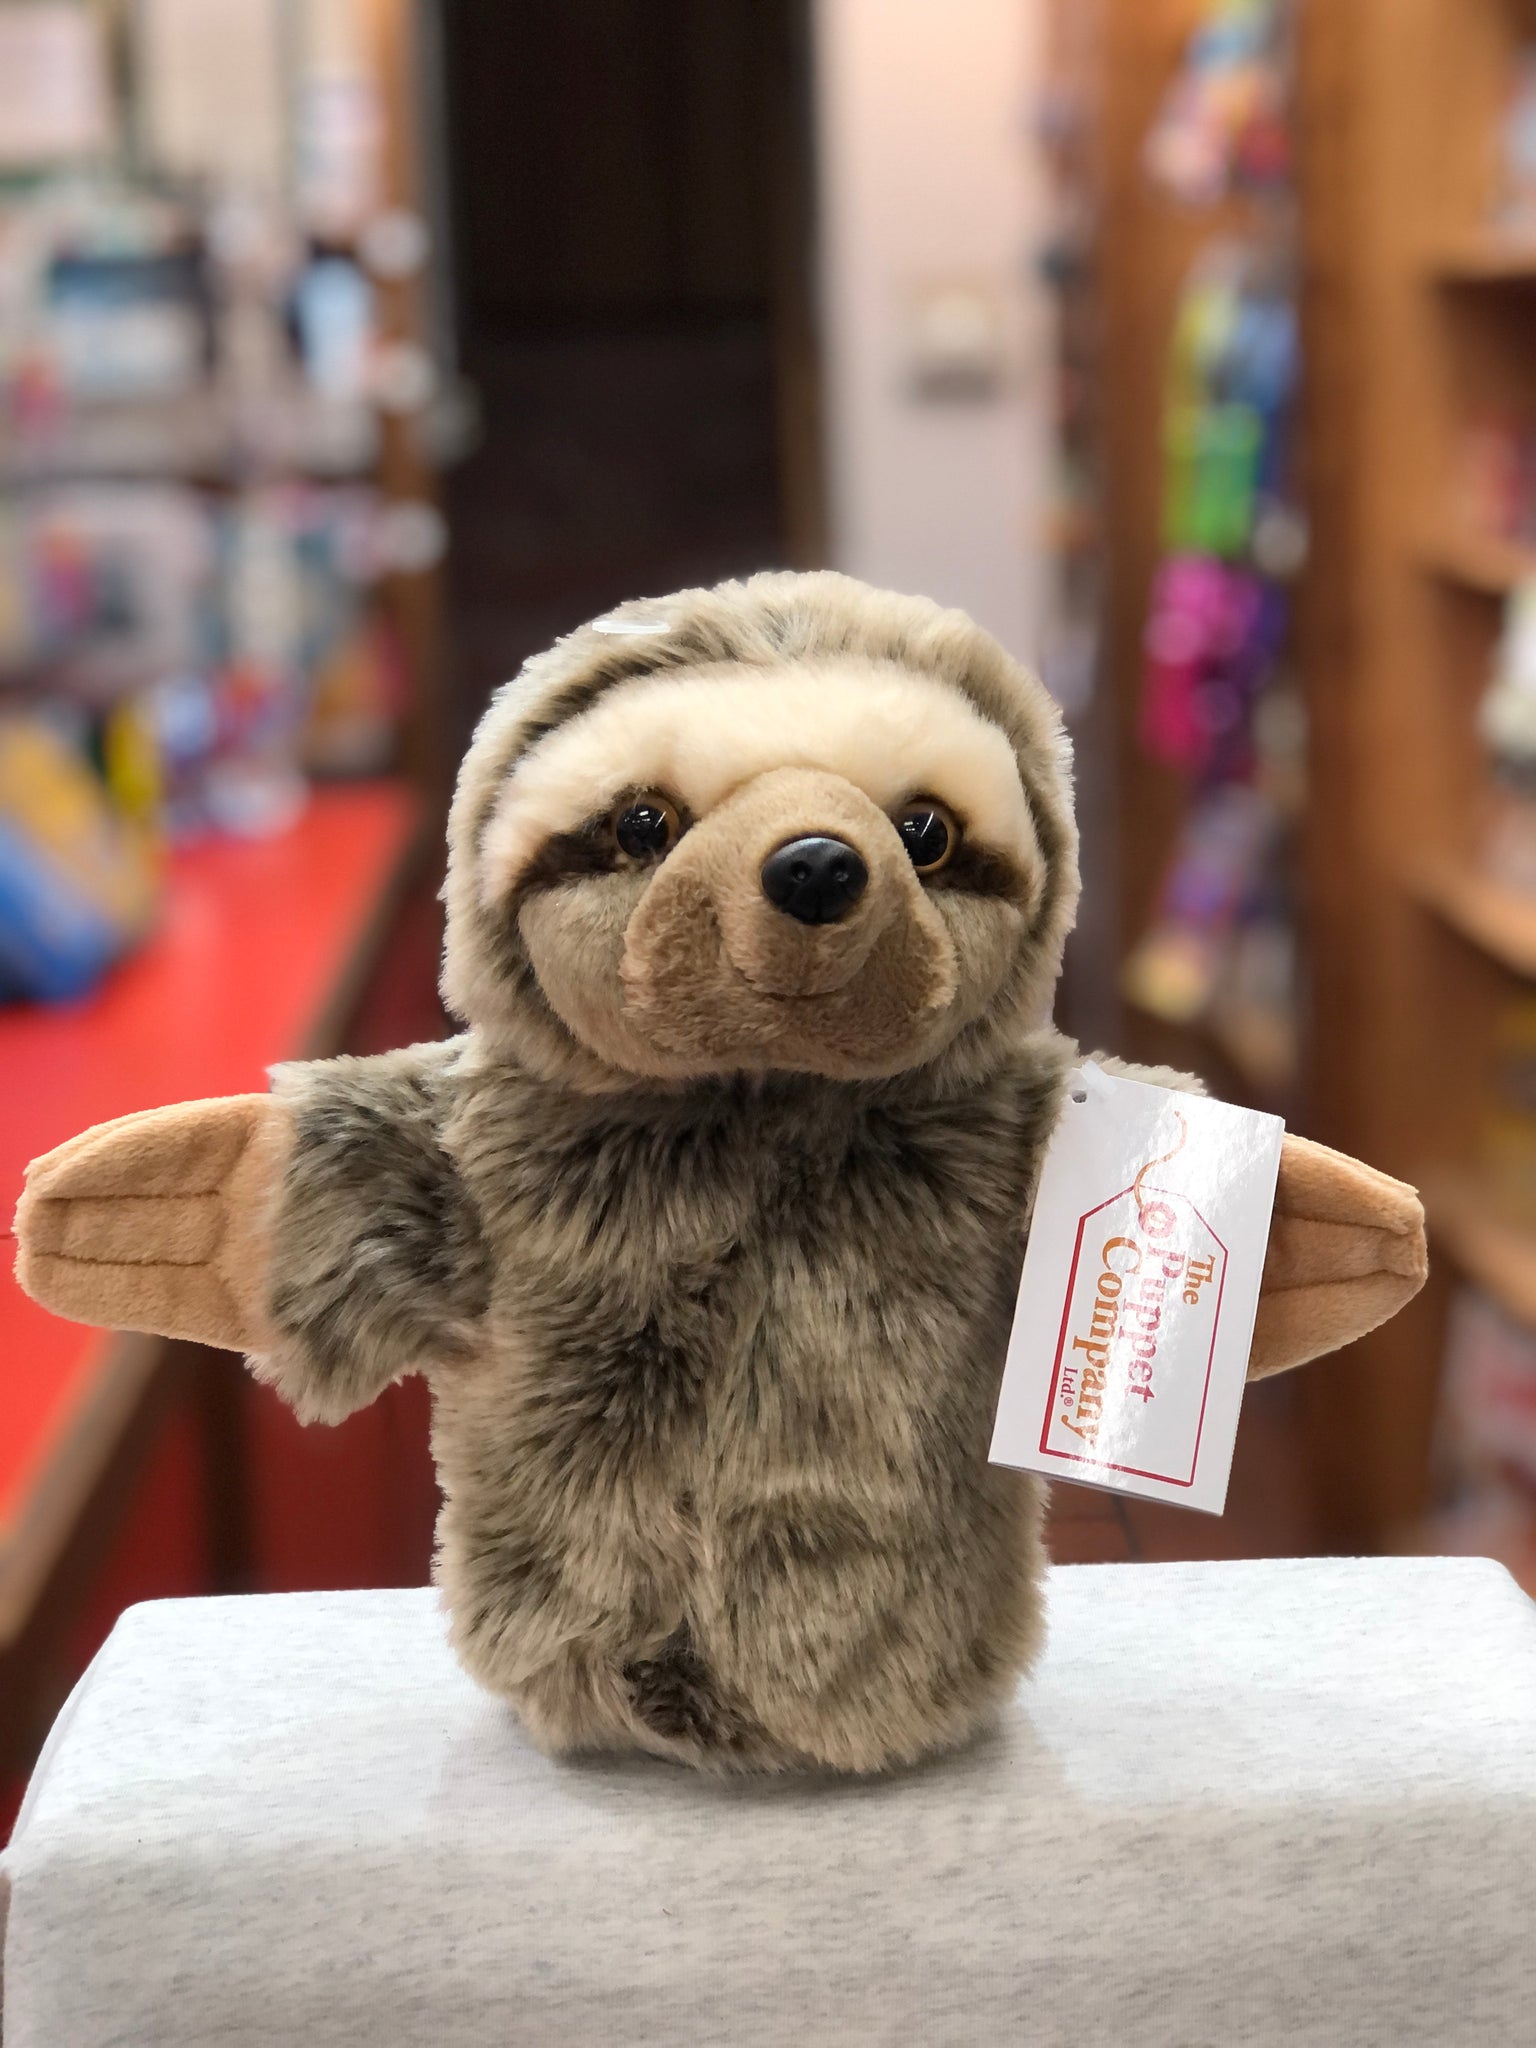 The Puppet Company CarPets Sloth Hand Puppet 11 – Sausalito Ferry Co